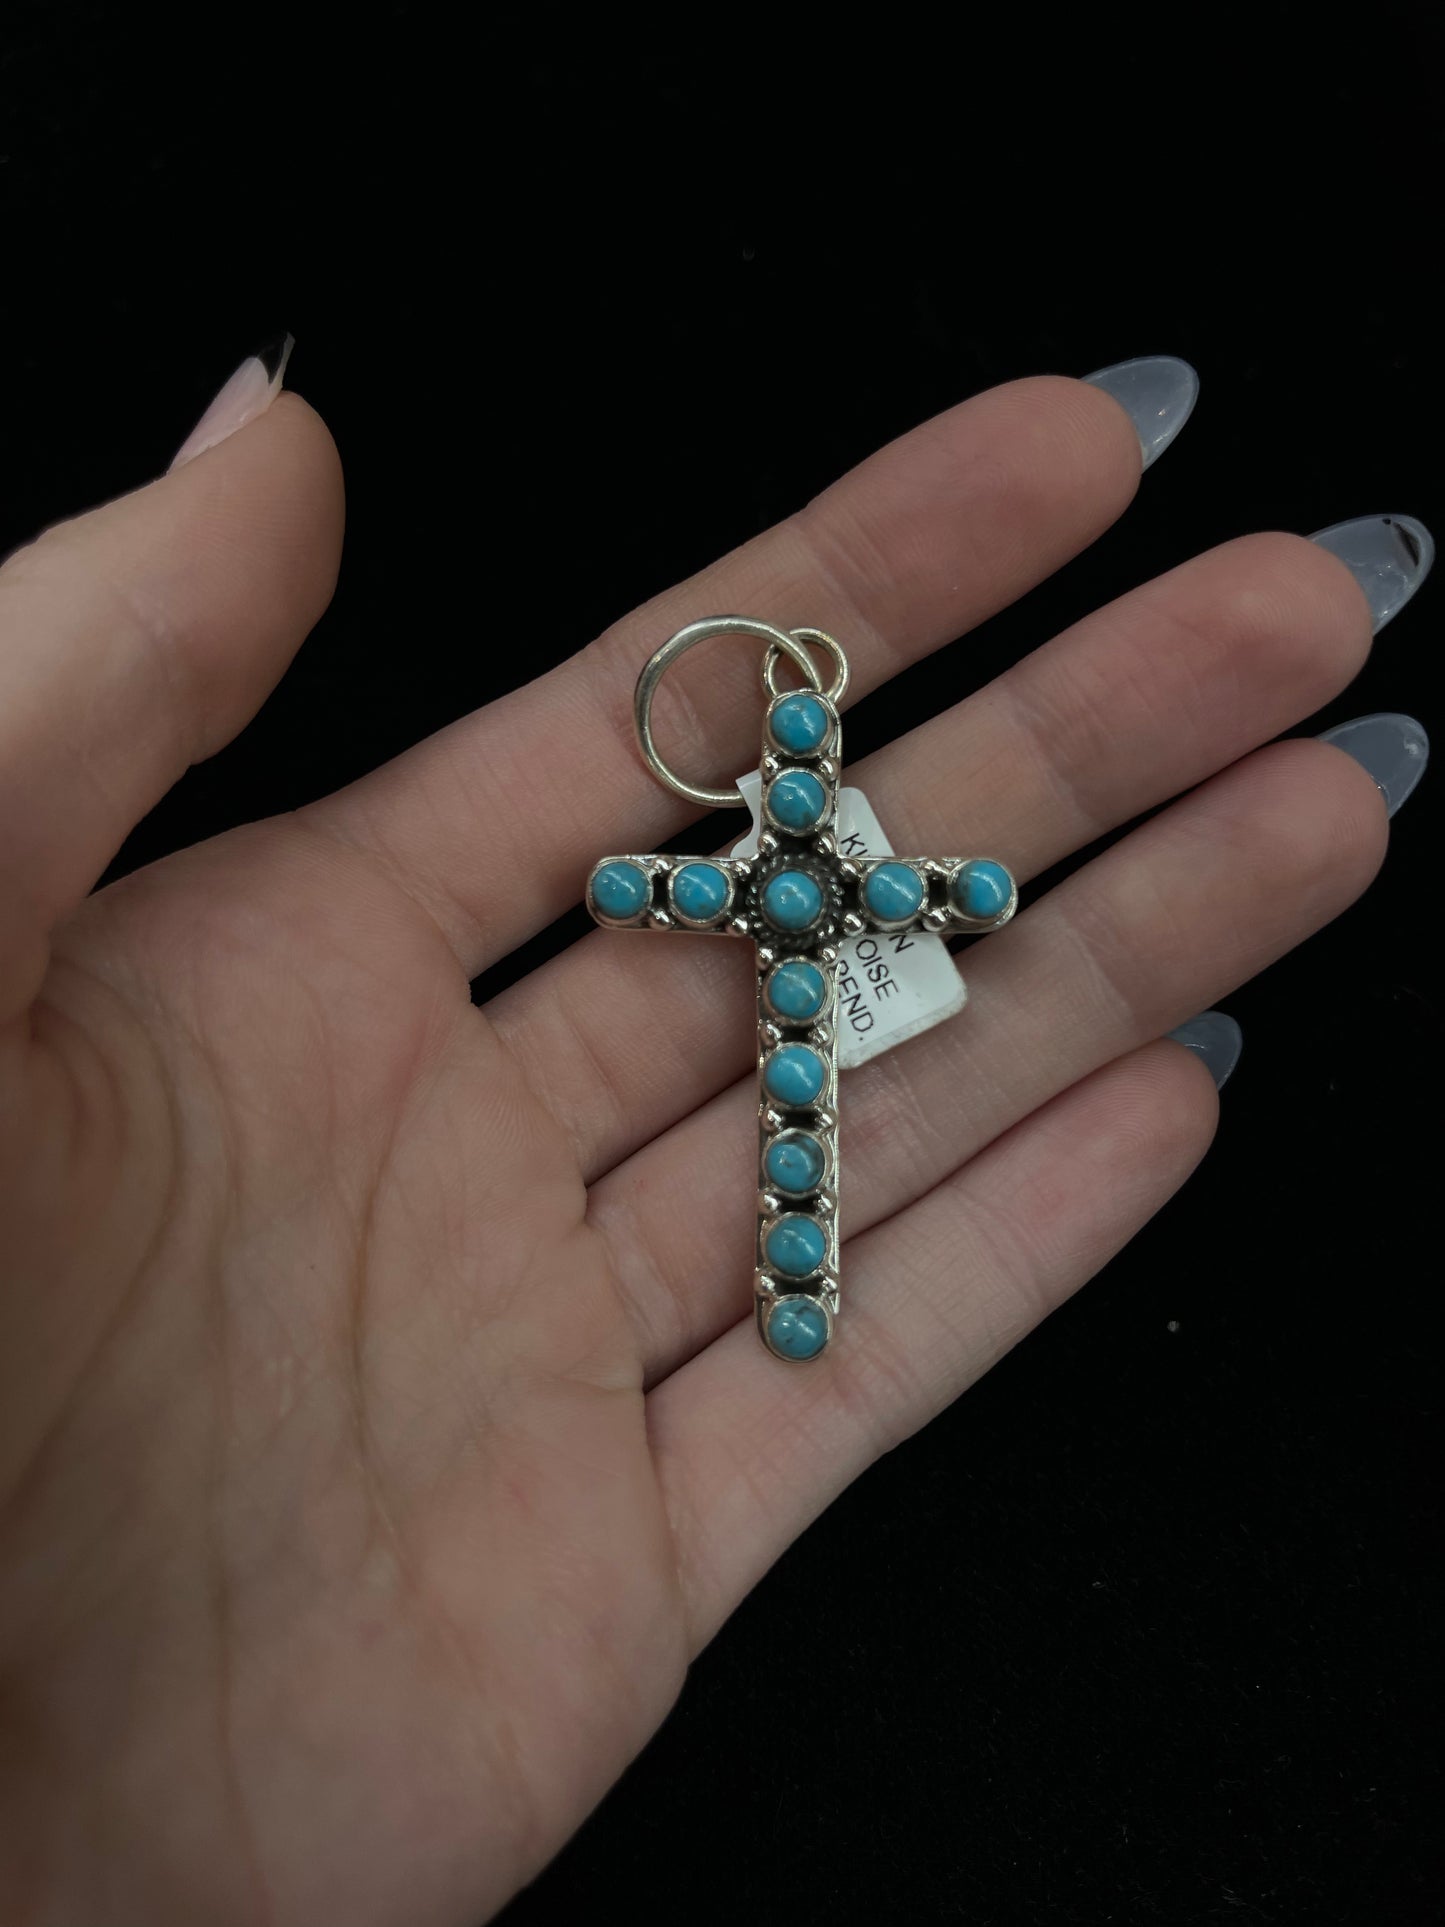 Sleeping Beauty Turquoise Cross Pendant with a 10mm Bale by Hada Collection